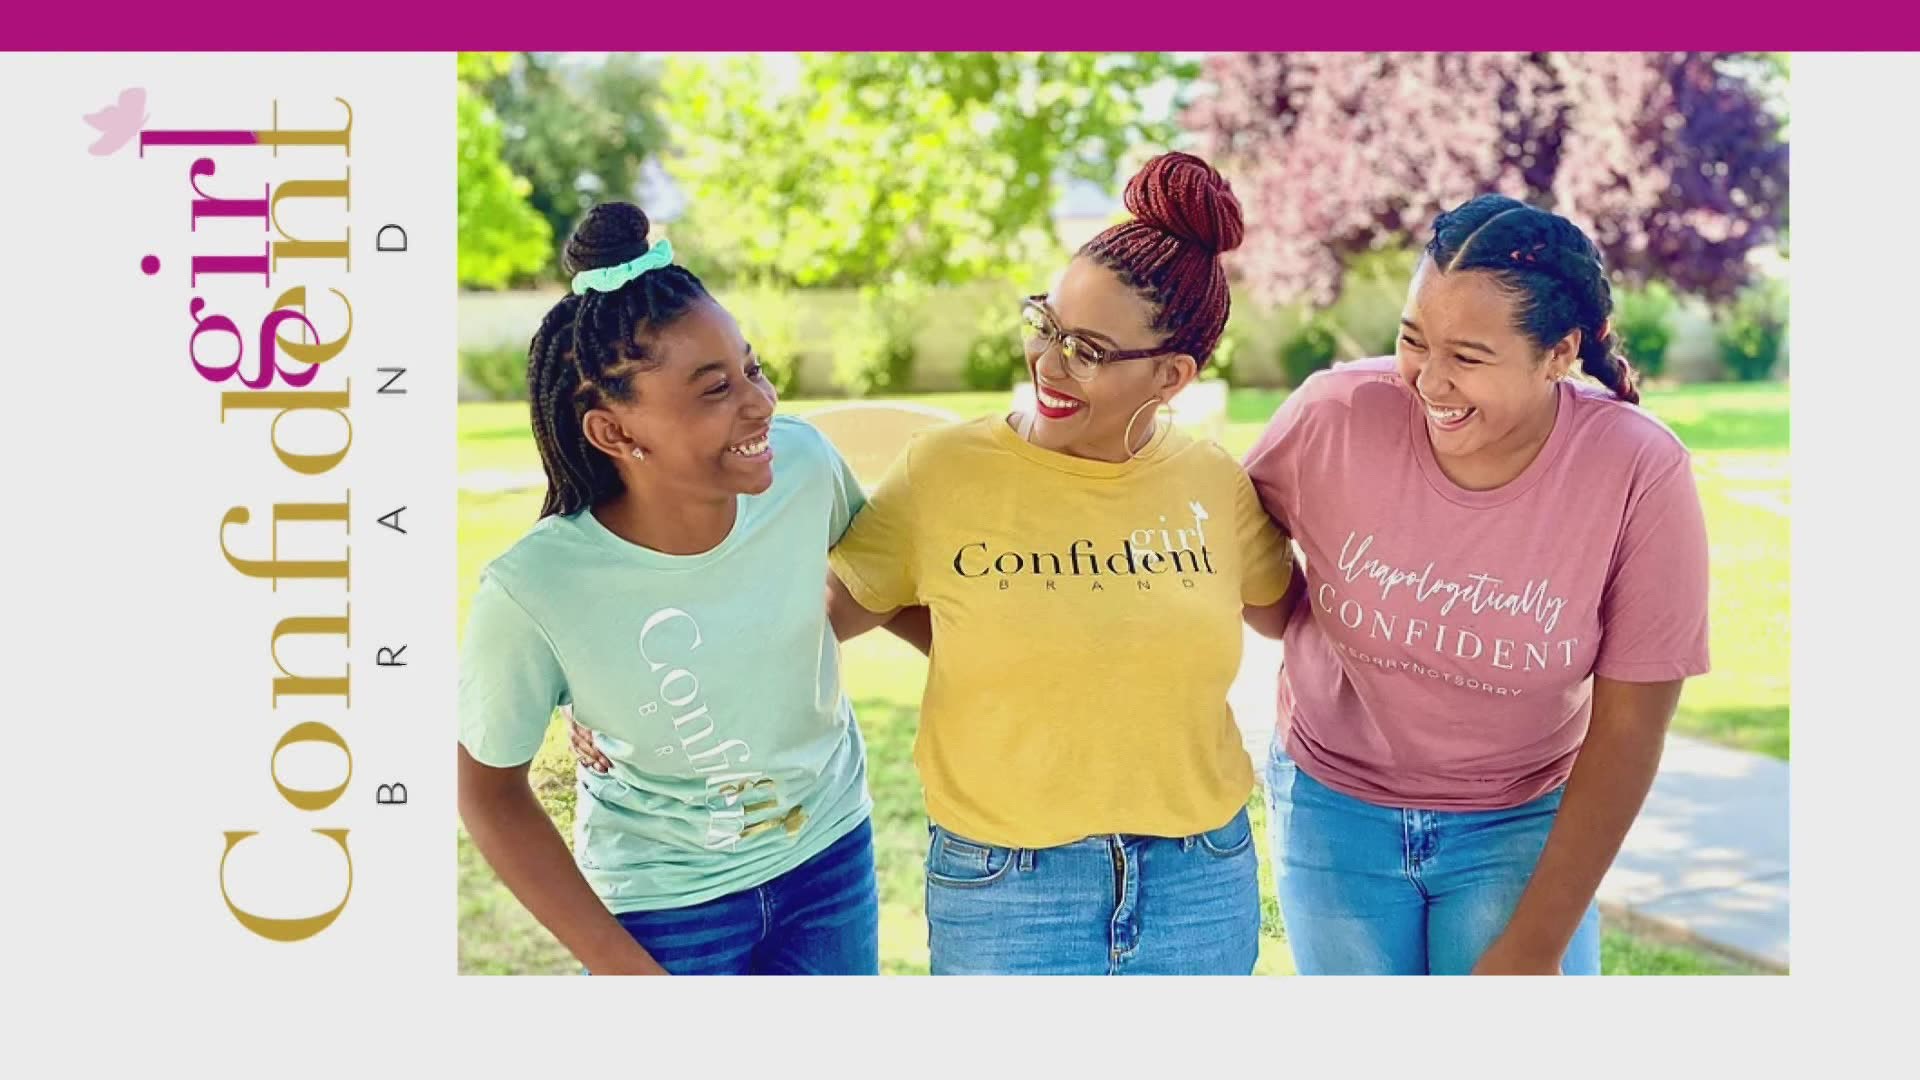 A 12-year-old girl launches clothing line and podcast to encourage confidence in young girls.